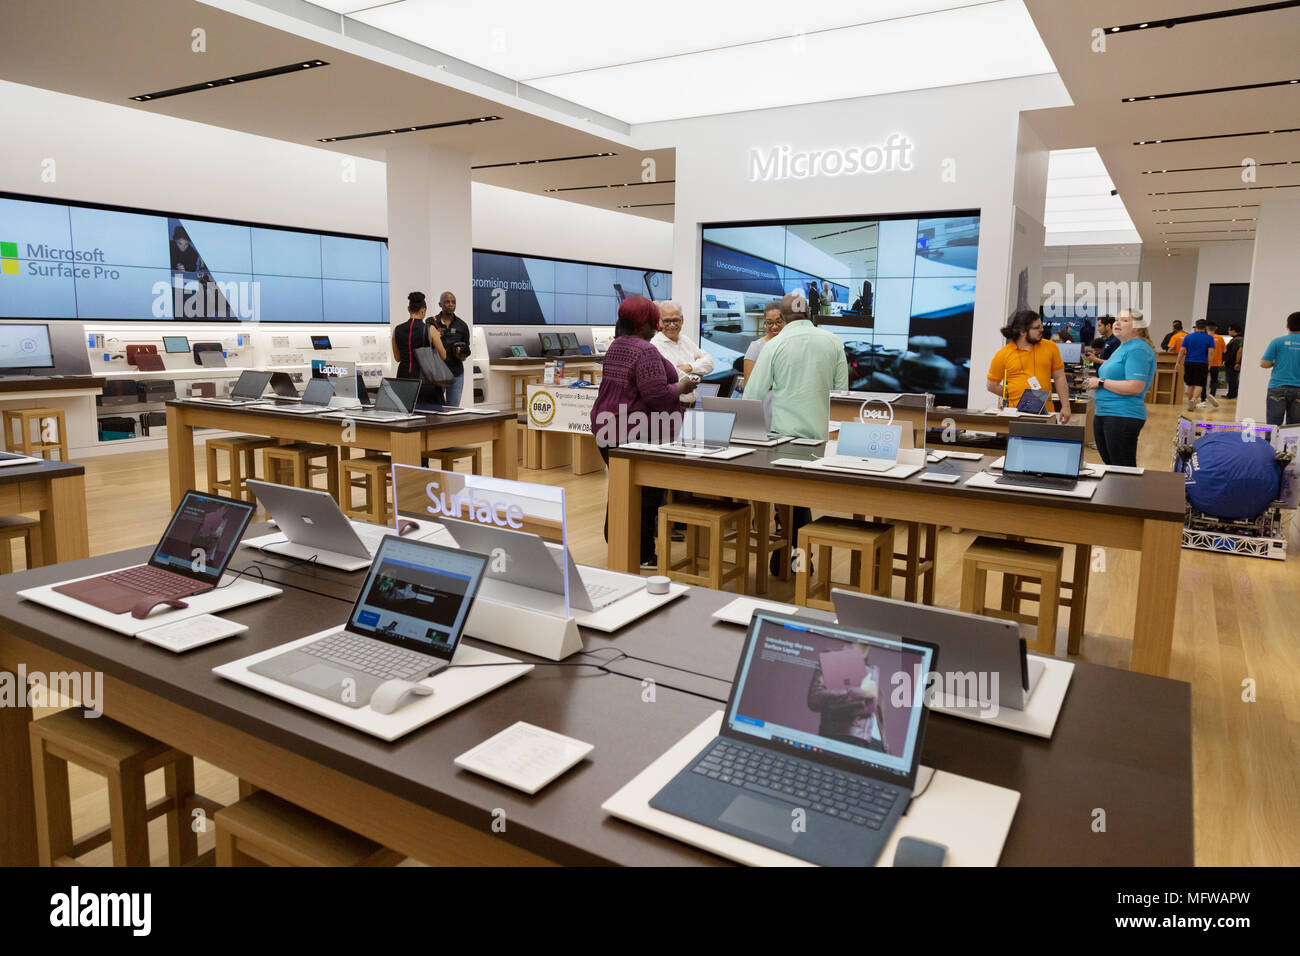 People shopping in the Microsoft store, The Galleria Mall, Houston, Texas United States of America Stock Photo